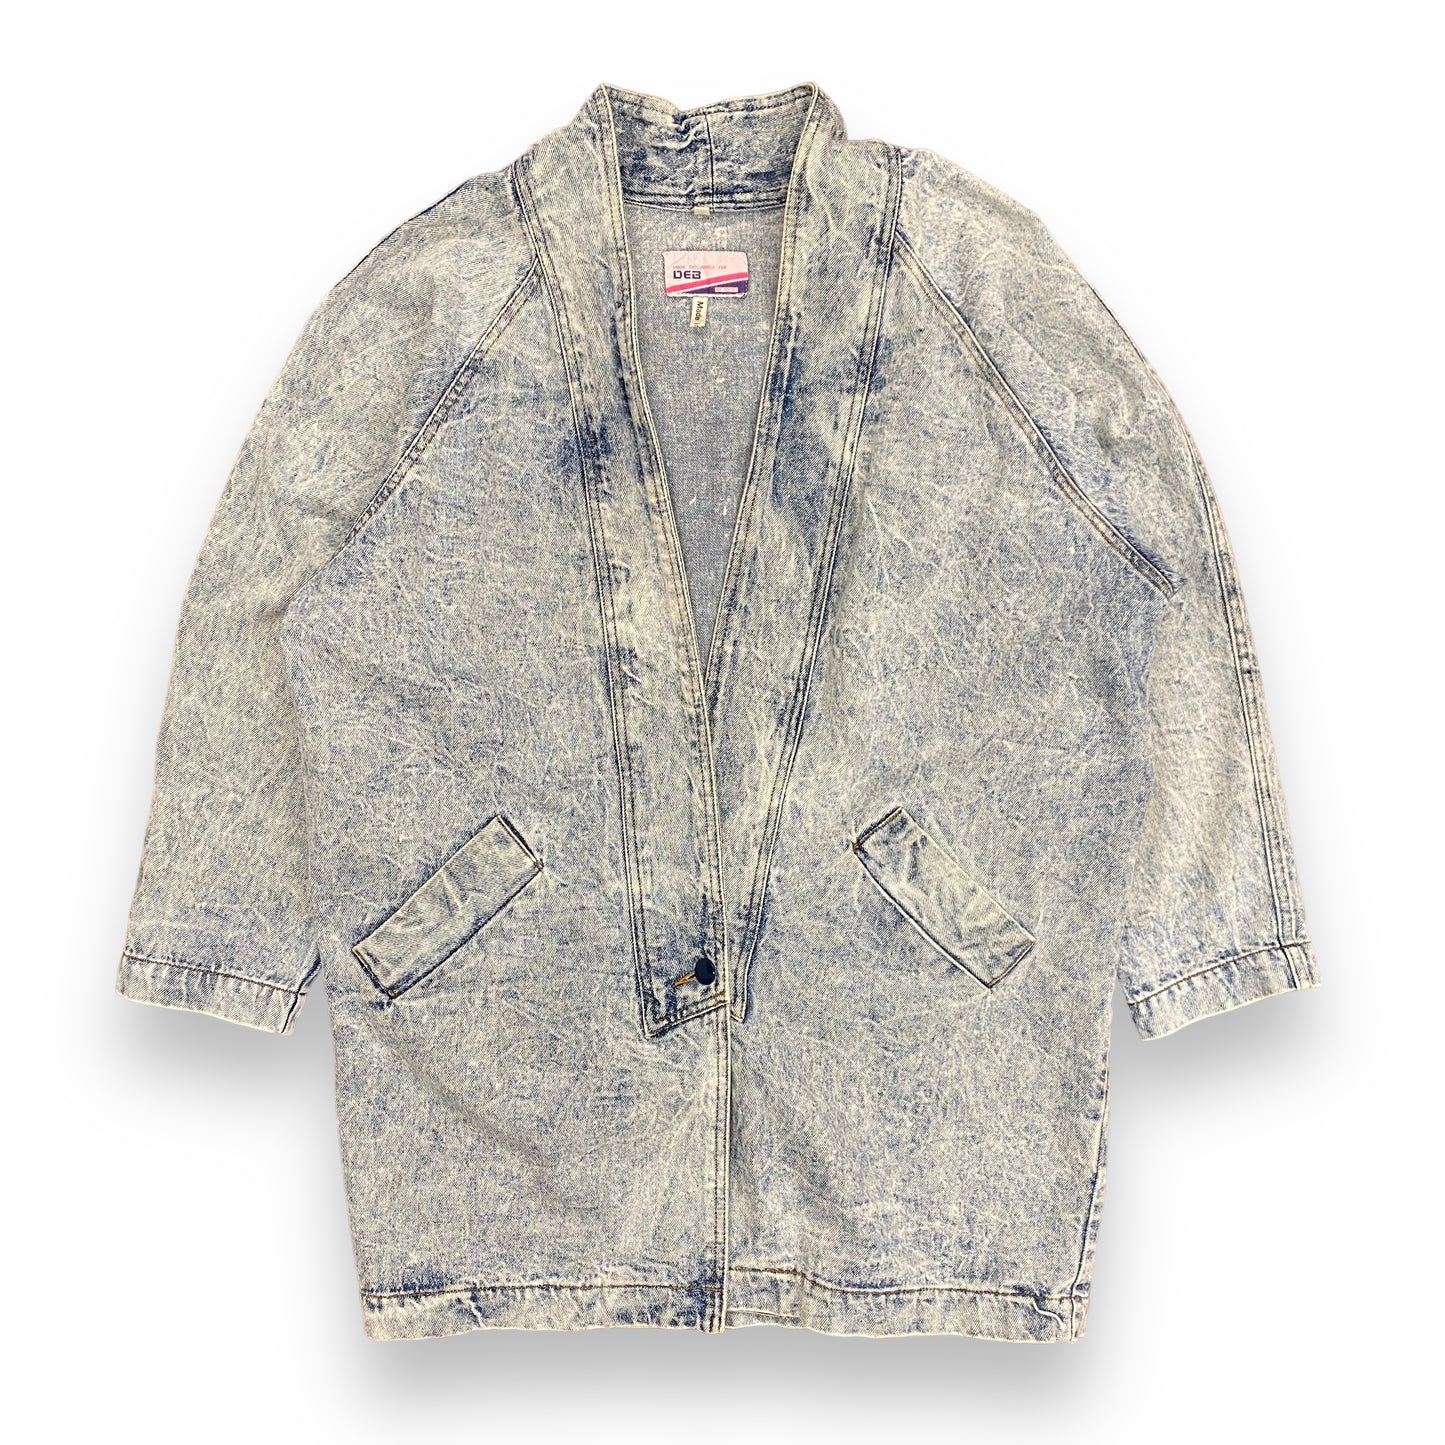 90s DEB Acid Washed Denim Single Button Trench Coat - Size Small